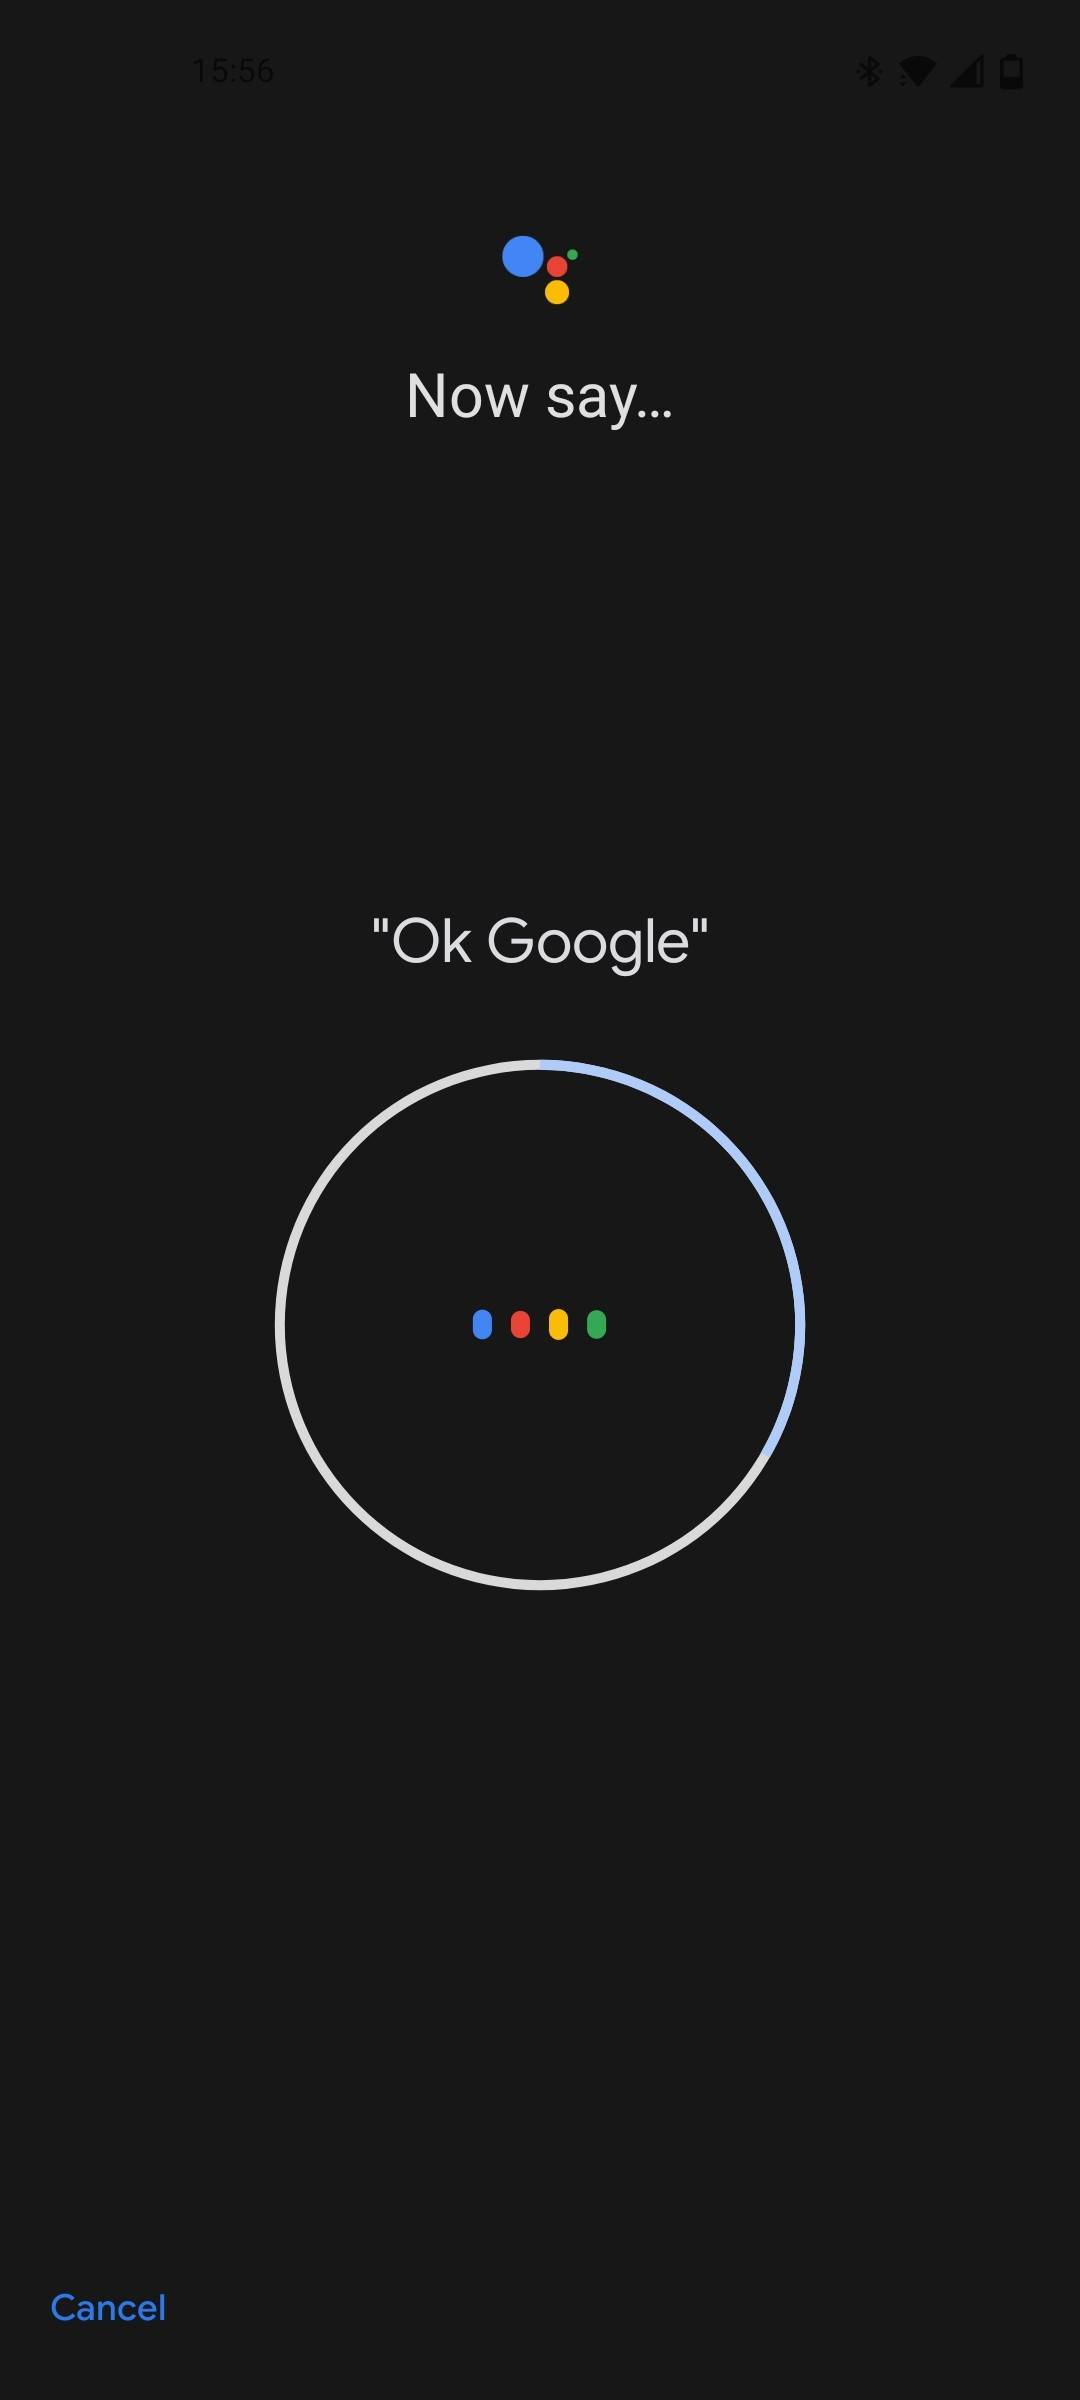 prompt asking user to say ok google